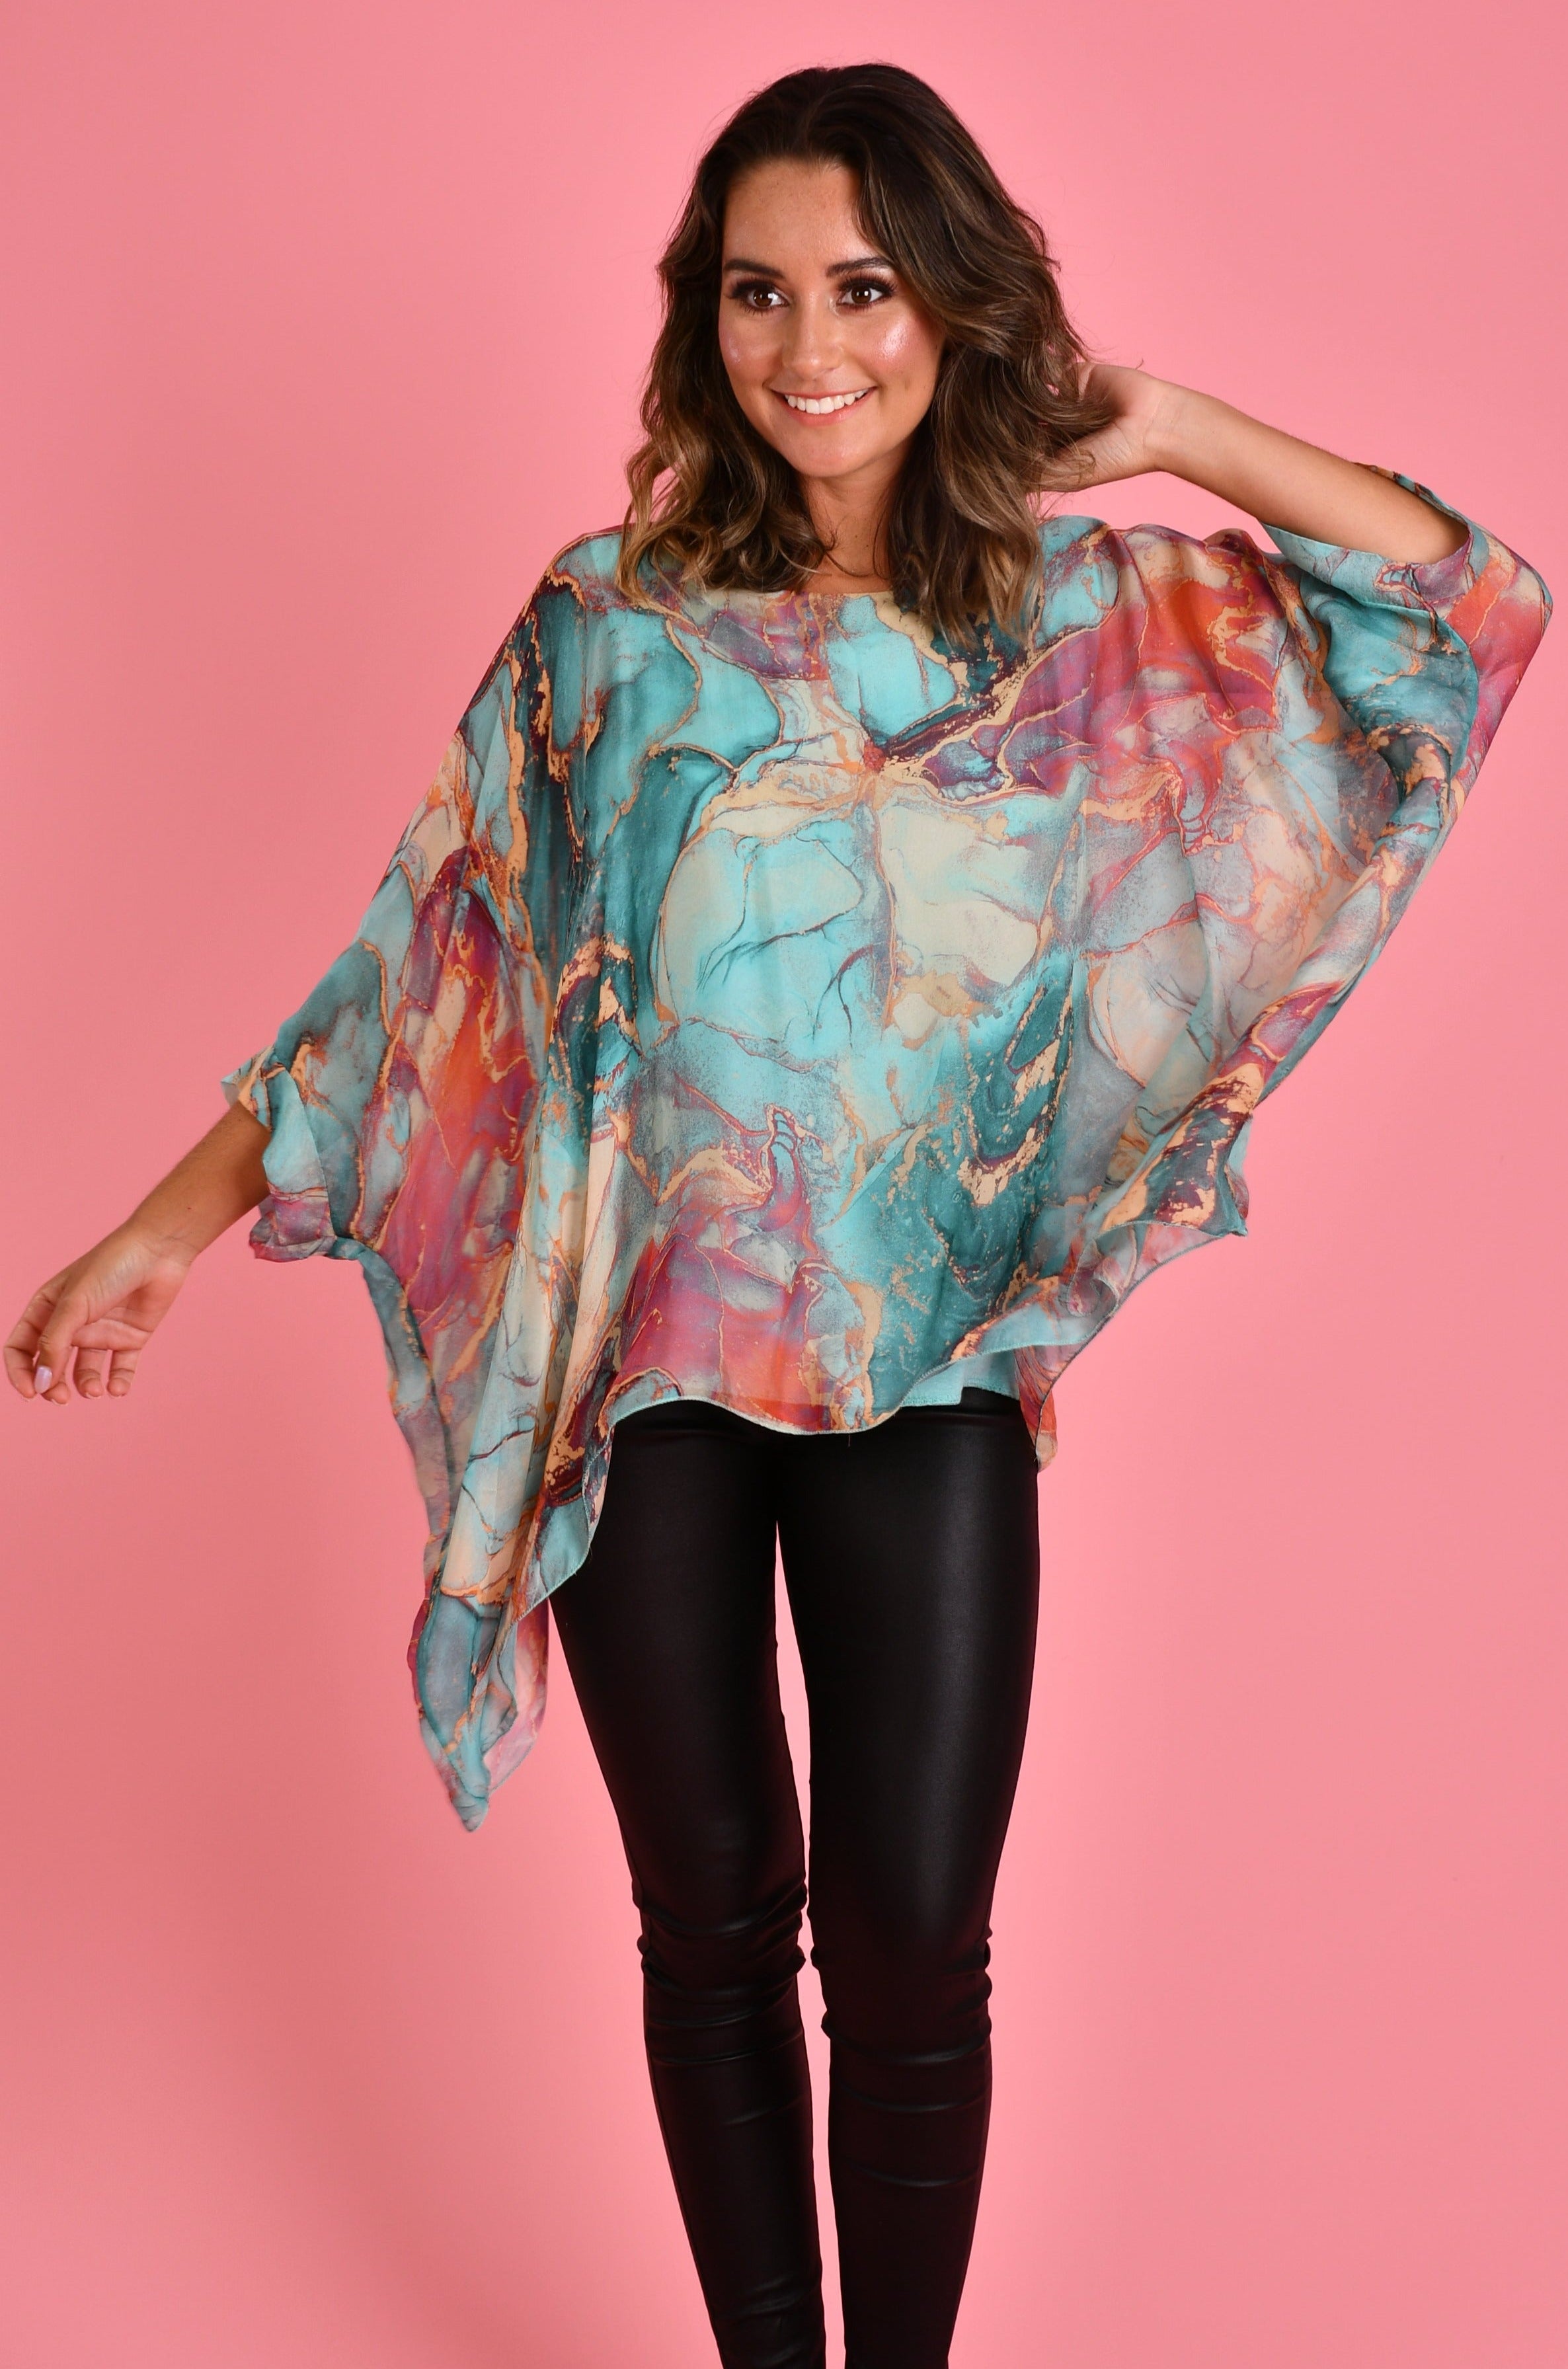 VLST750 (1688) - TUSCANY SILK TOP W/ SLIP - TURQUOISE MARBLE